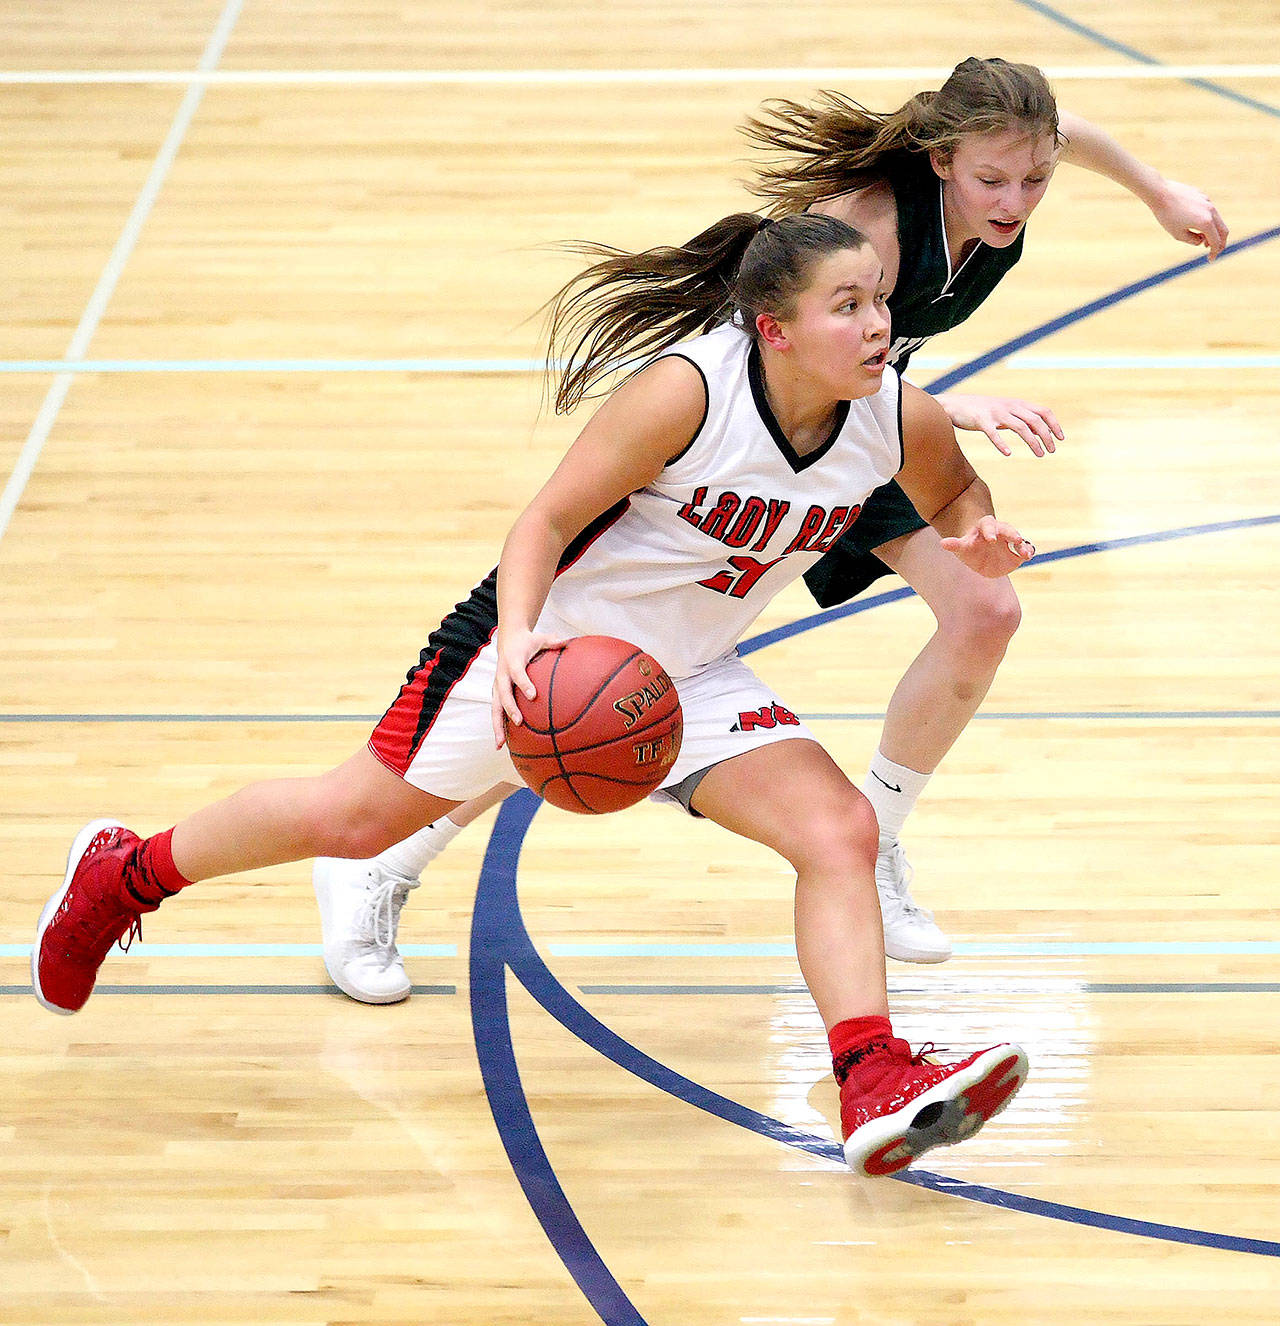 Neah Bay’ s Gina McCauley drives past Selkirk’s Bree Dawson in Neah Bay’s 52-43 1B Regionals victory Saturday. (David Willoughby/for Peninsula Daily News)